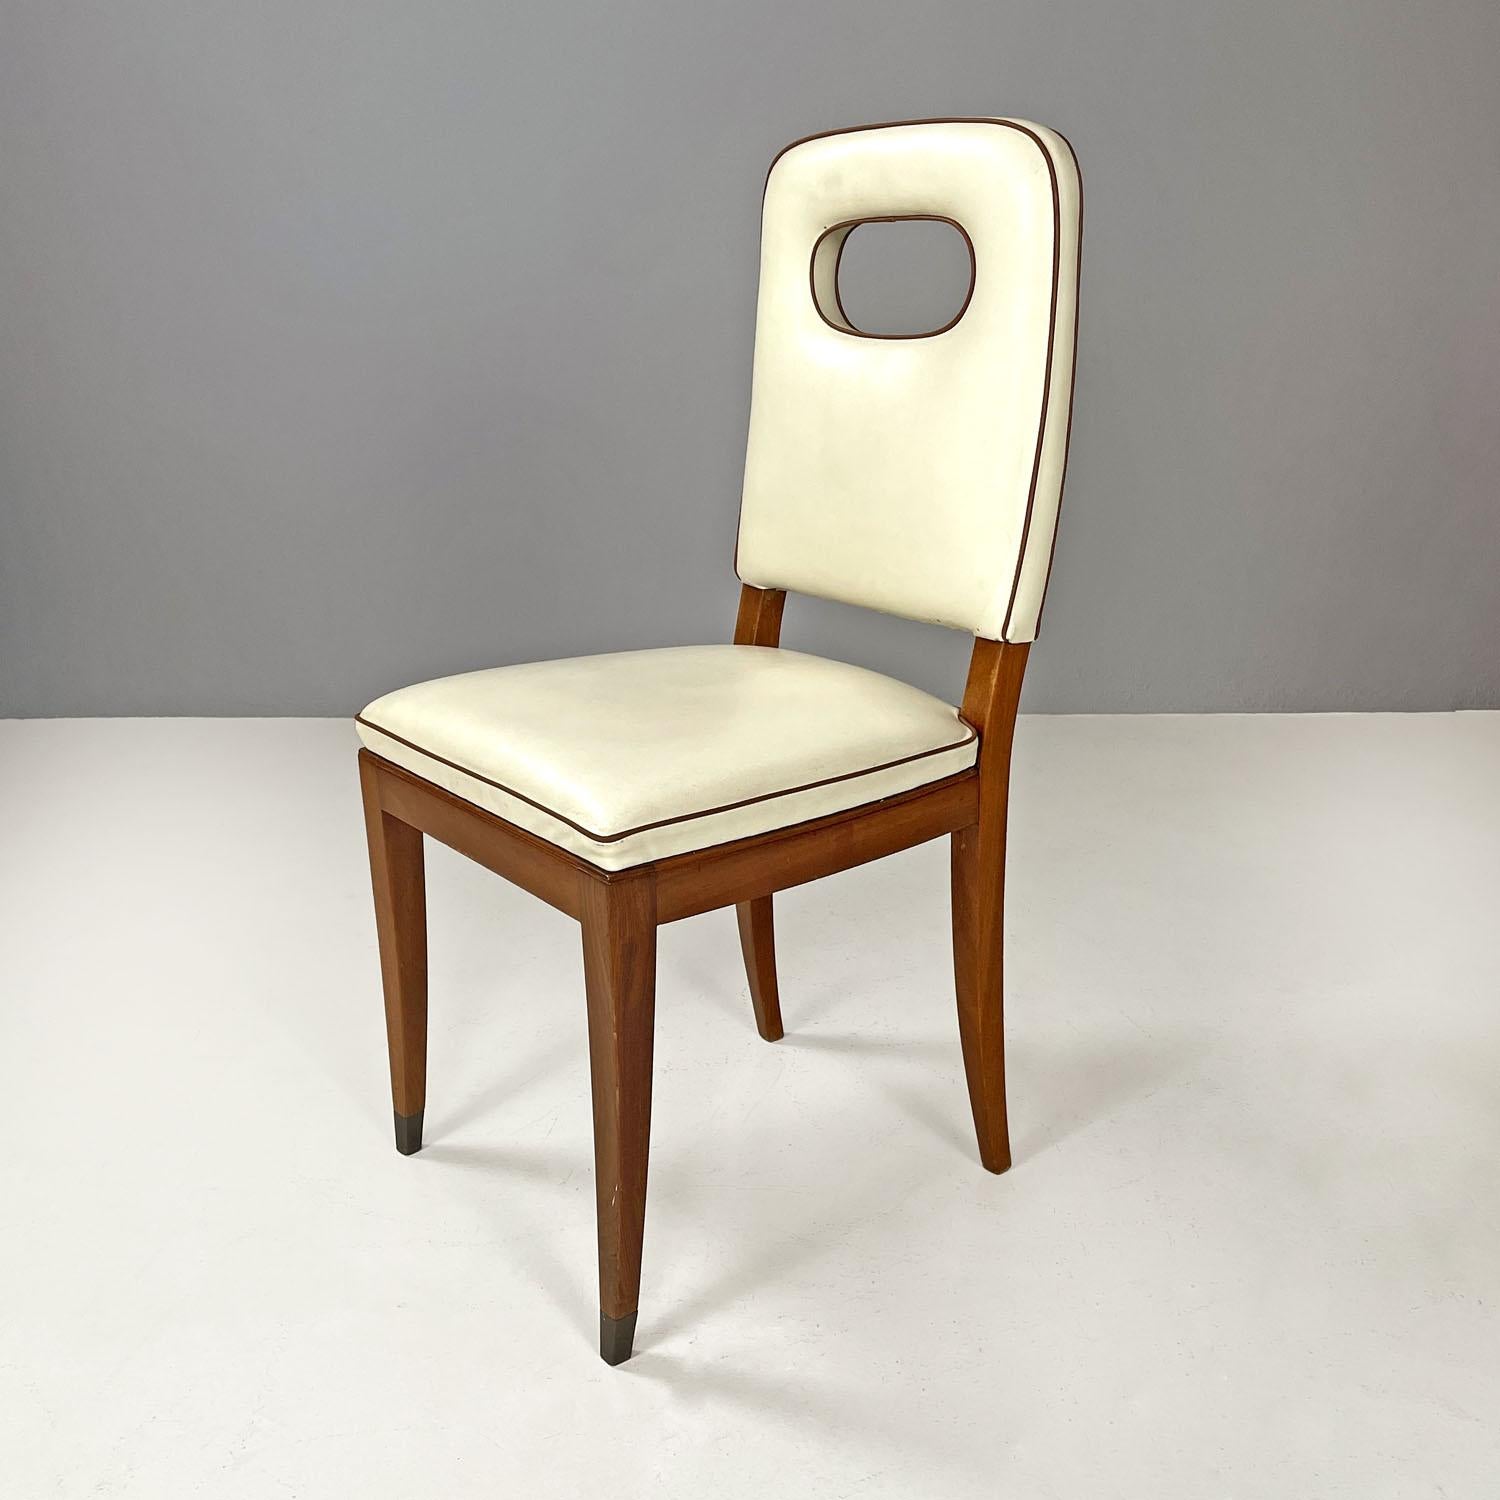 Italian Art Deco white leather and wood chairs by Giovanni Gariboldi, 1940s In Good Condition For Sale In MIlano, IT